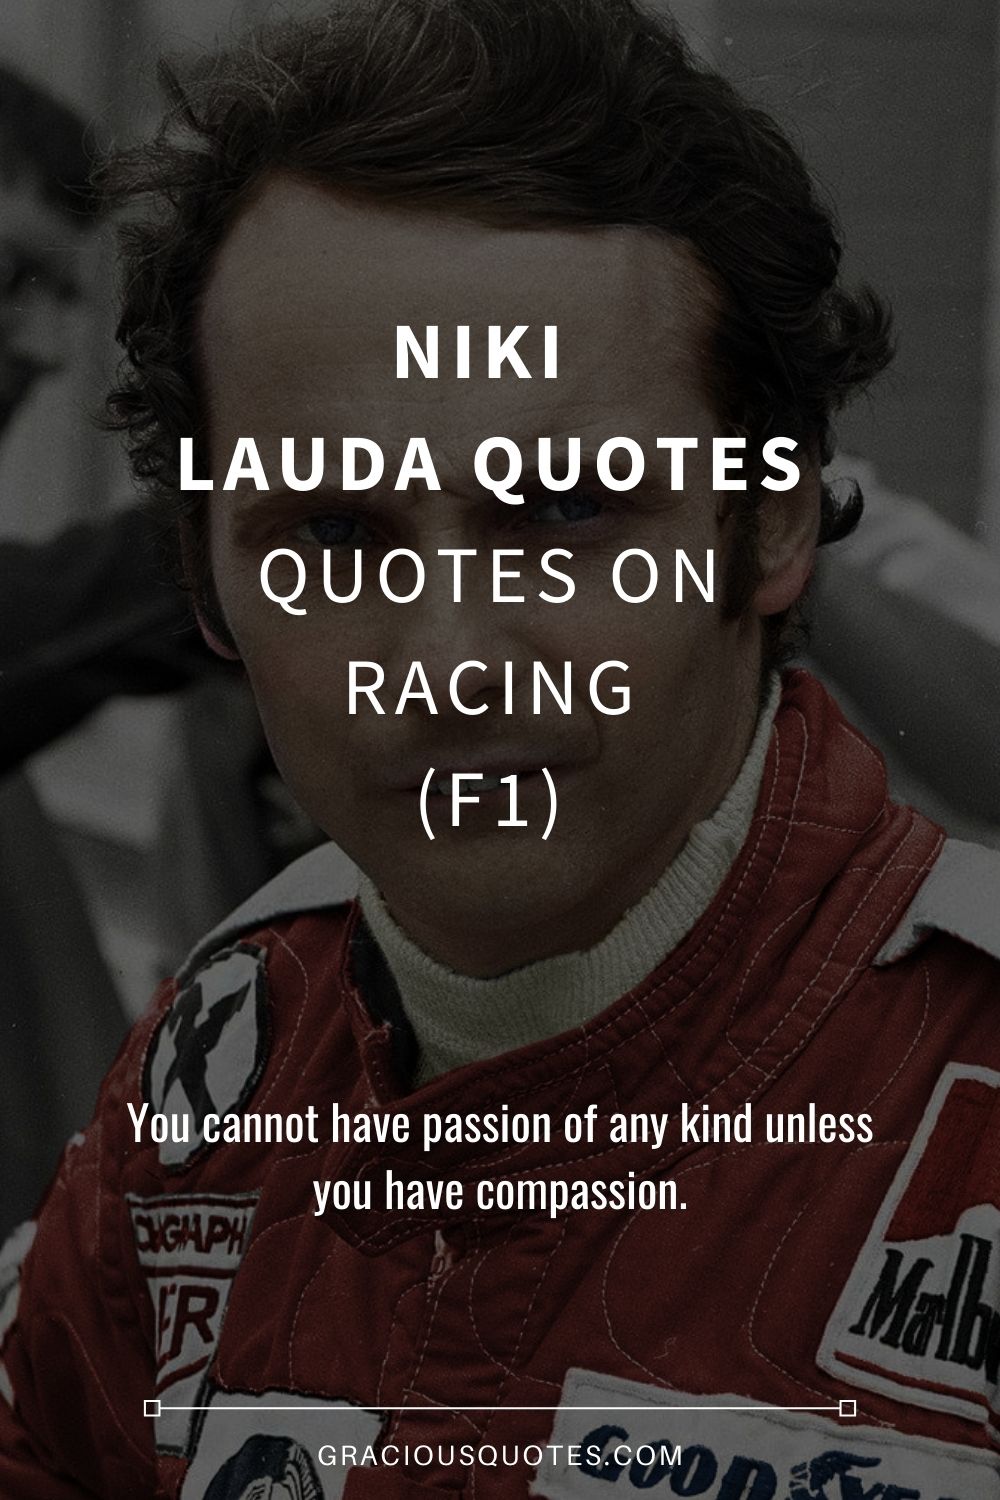 Niki Lauda Quotes Quotes on Racing (F1) - Gracious Quotes